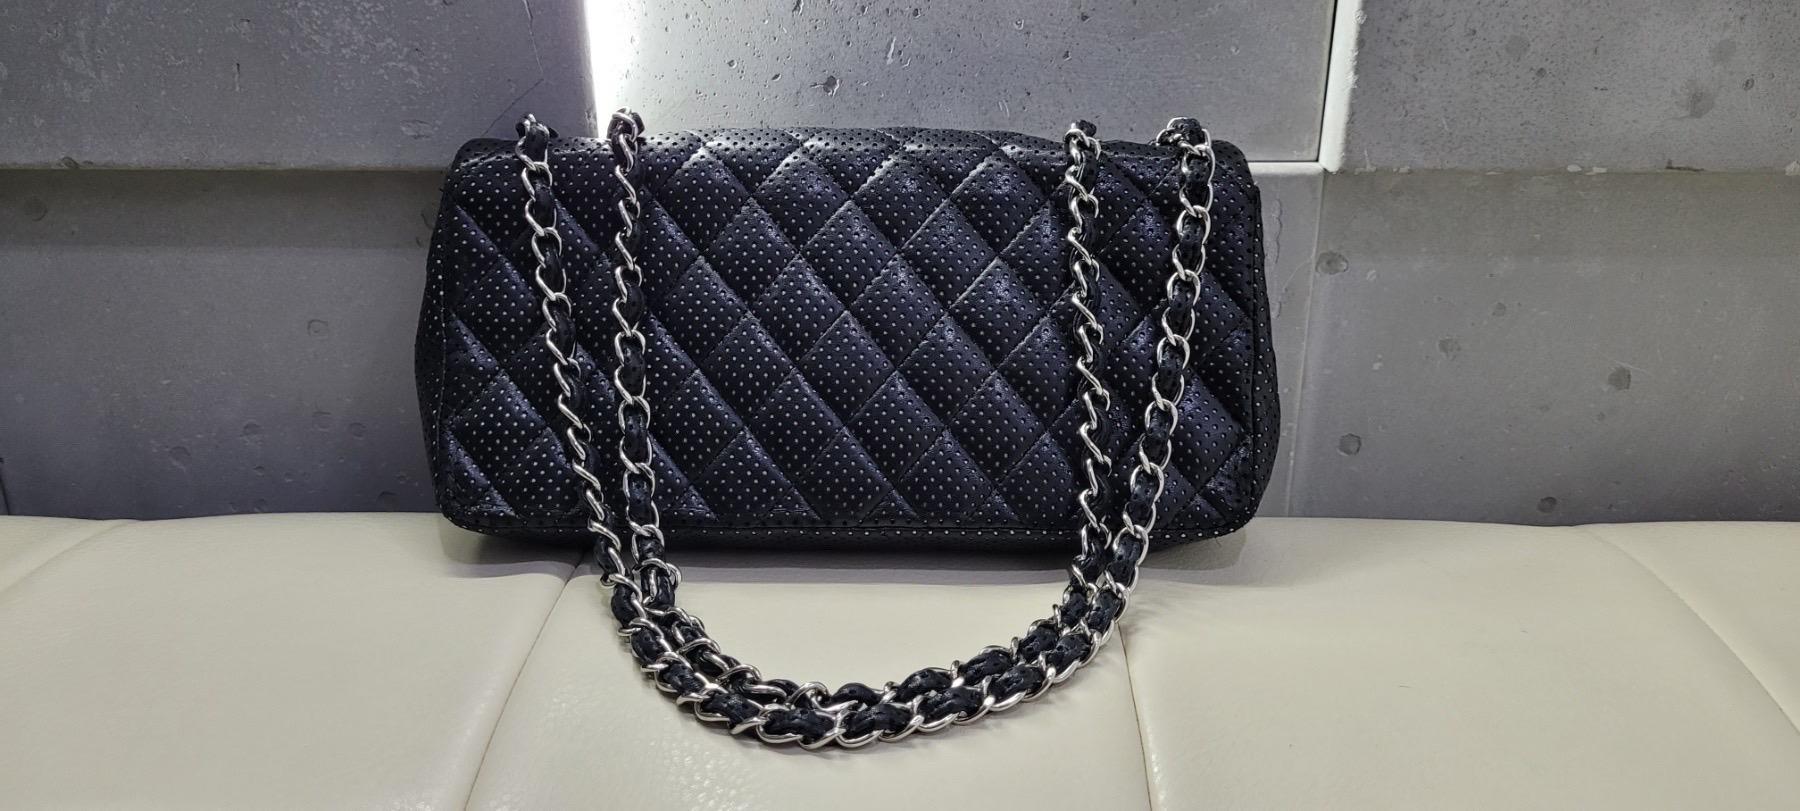     Chanel Shoulder Bag
    By Karl Lagerfeld
    Neutrals Leather
    Interlocking CC Logo, Quilted Pattern & Chain-Link Accent
    Silver-Tone Hardware
    Chain-Link Shoulder Straps
    Leather Lining & Dual Interior Pockets
    Flap Closure at